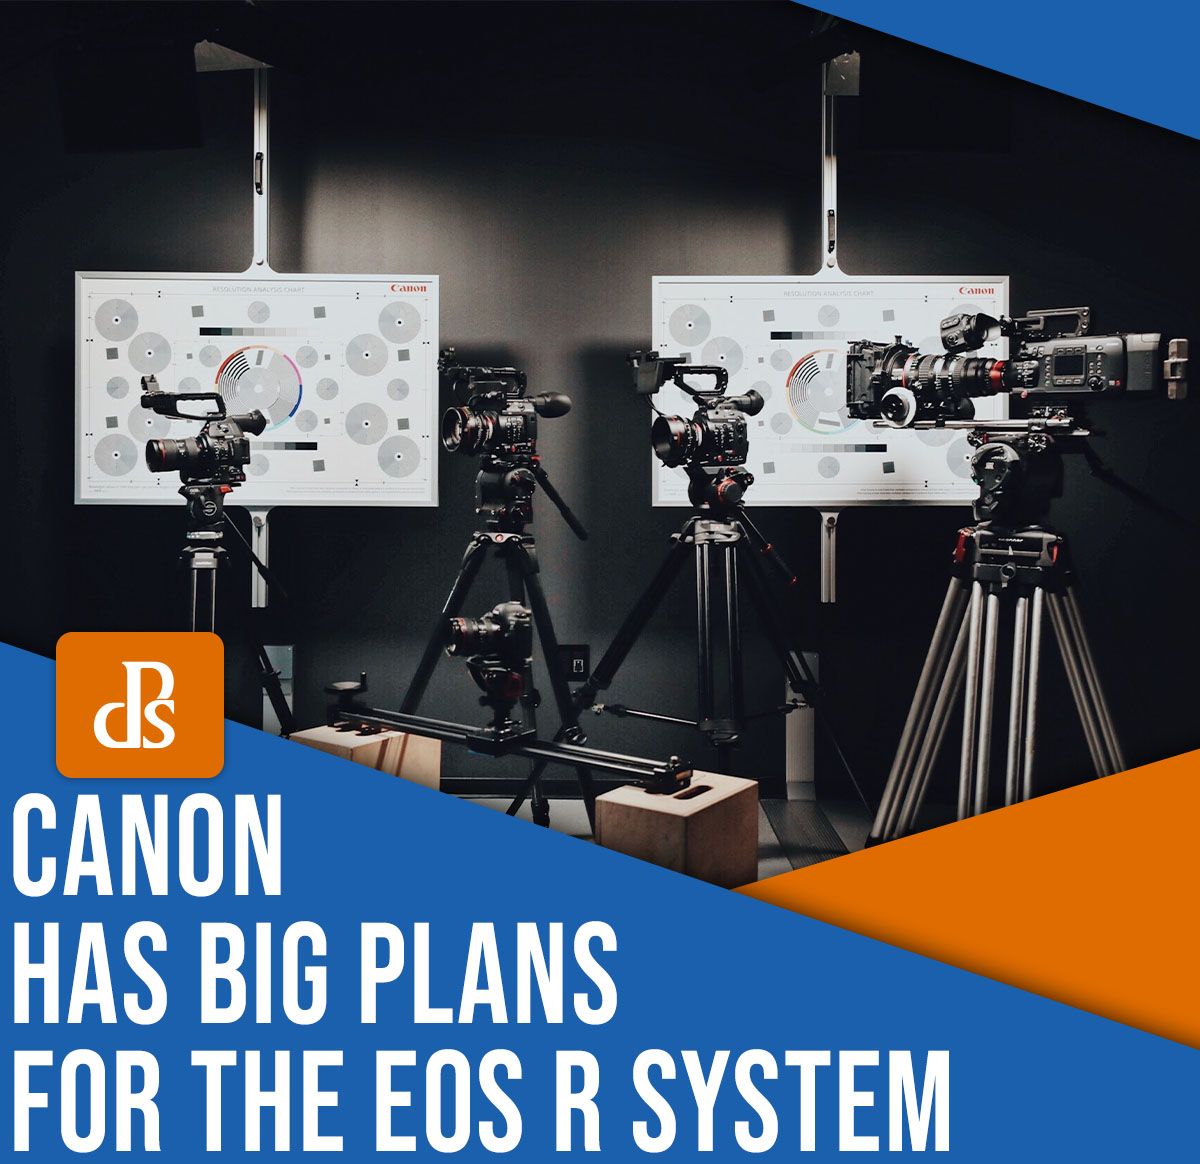 Canon has big plans for the EOS R system